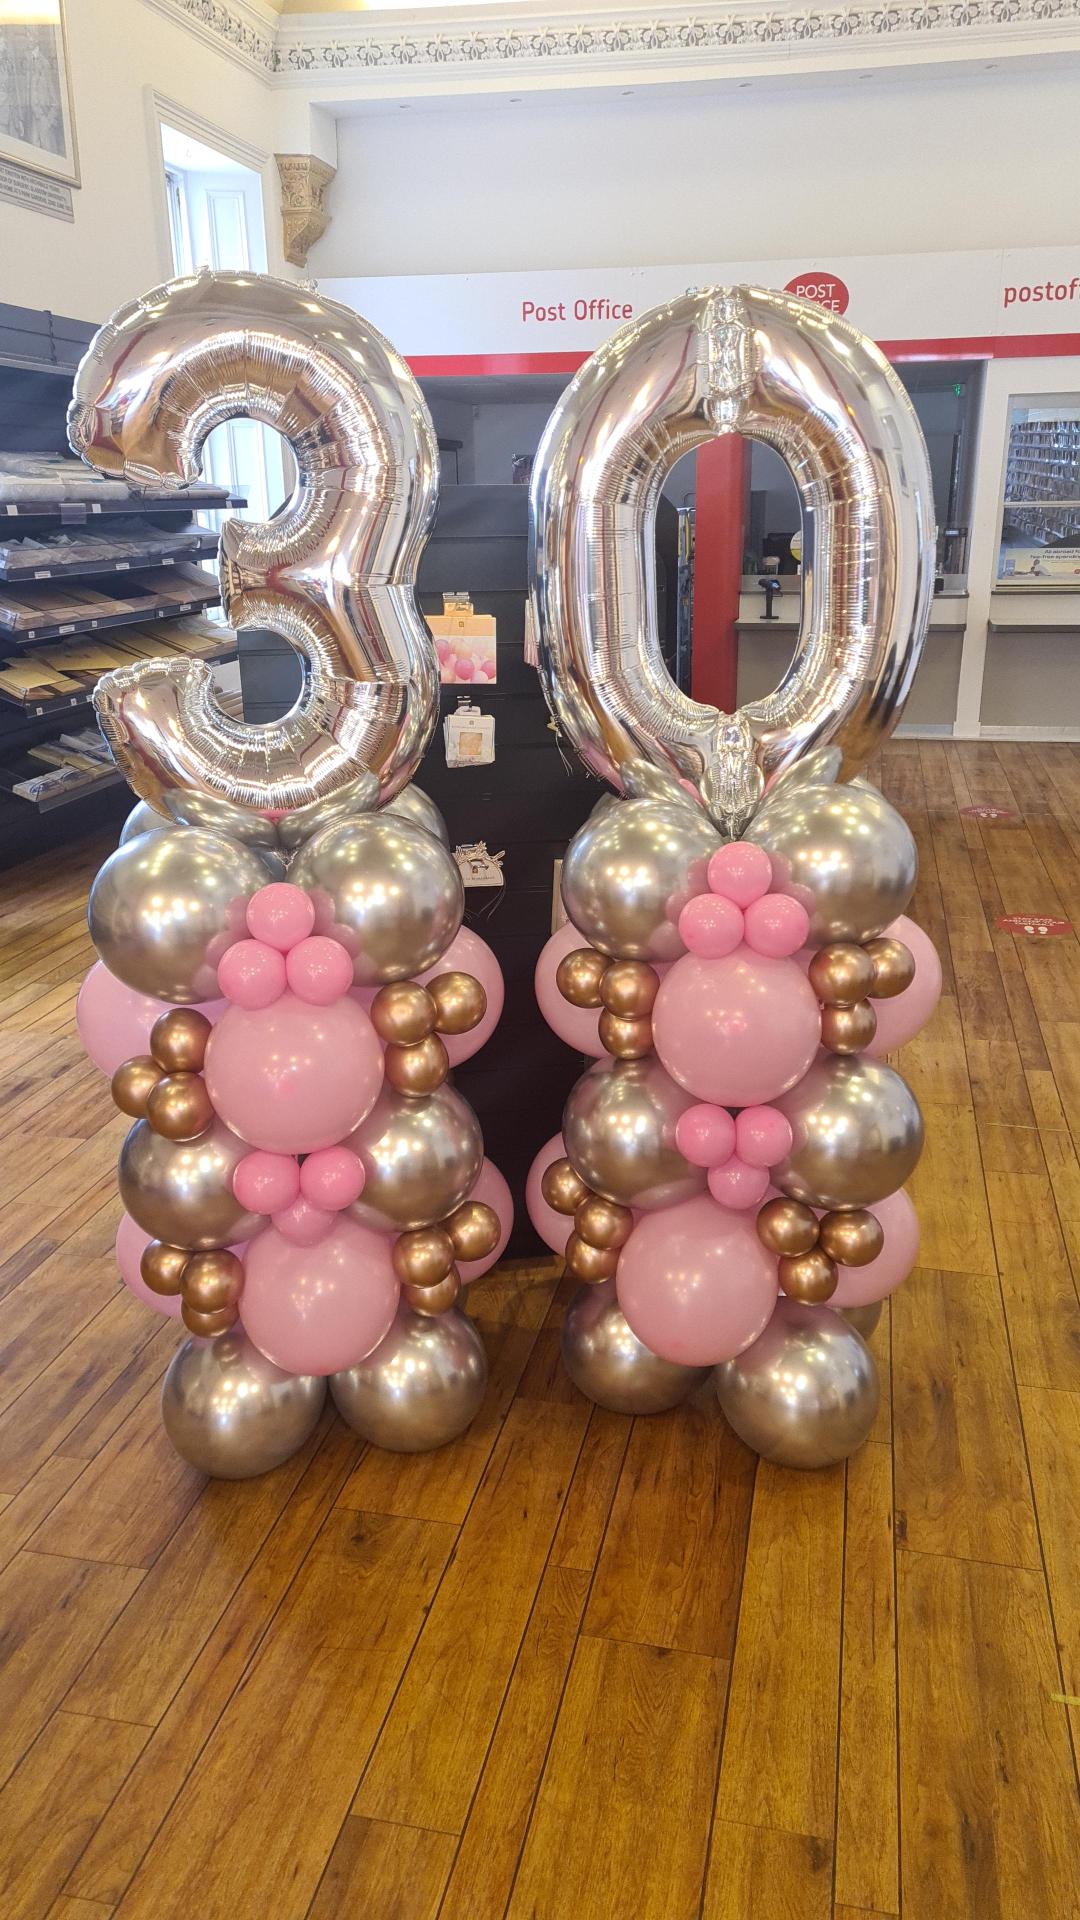 Two 5 Layer Air-filled Balloon Stacks from Penny Black